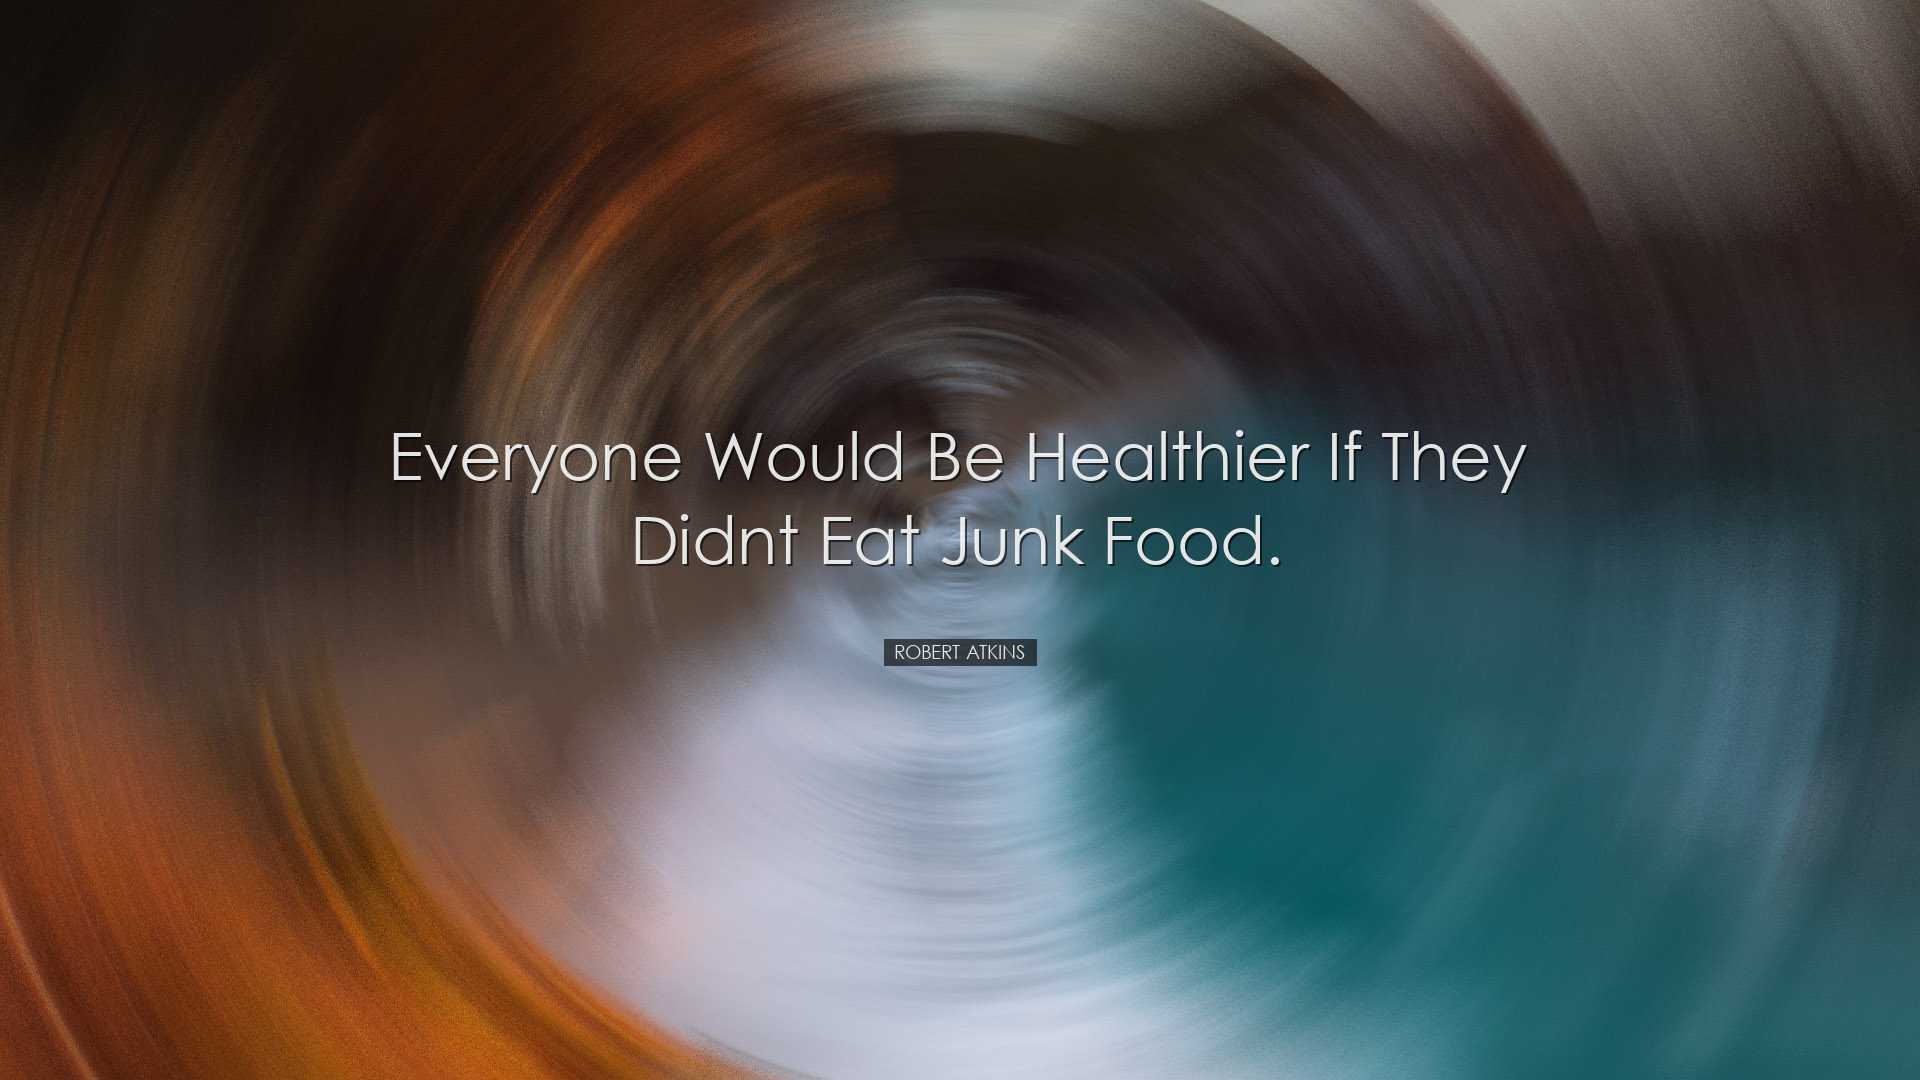 Everyone would be healthier if they didnt eat junk food. - Robert